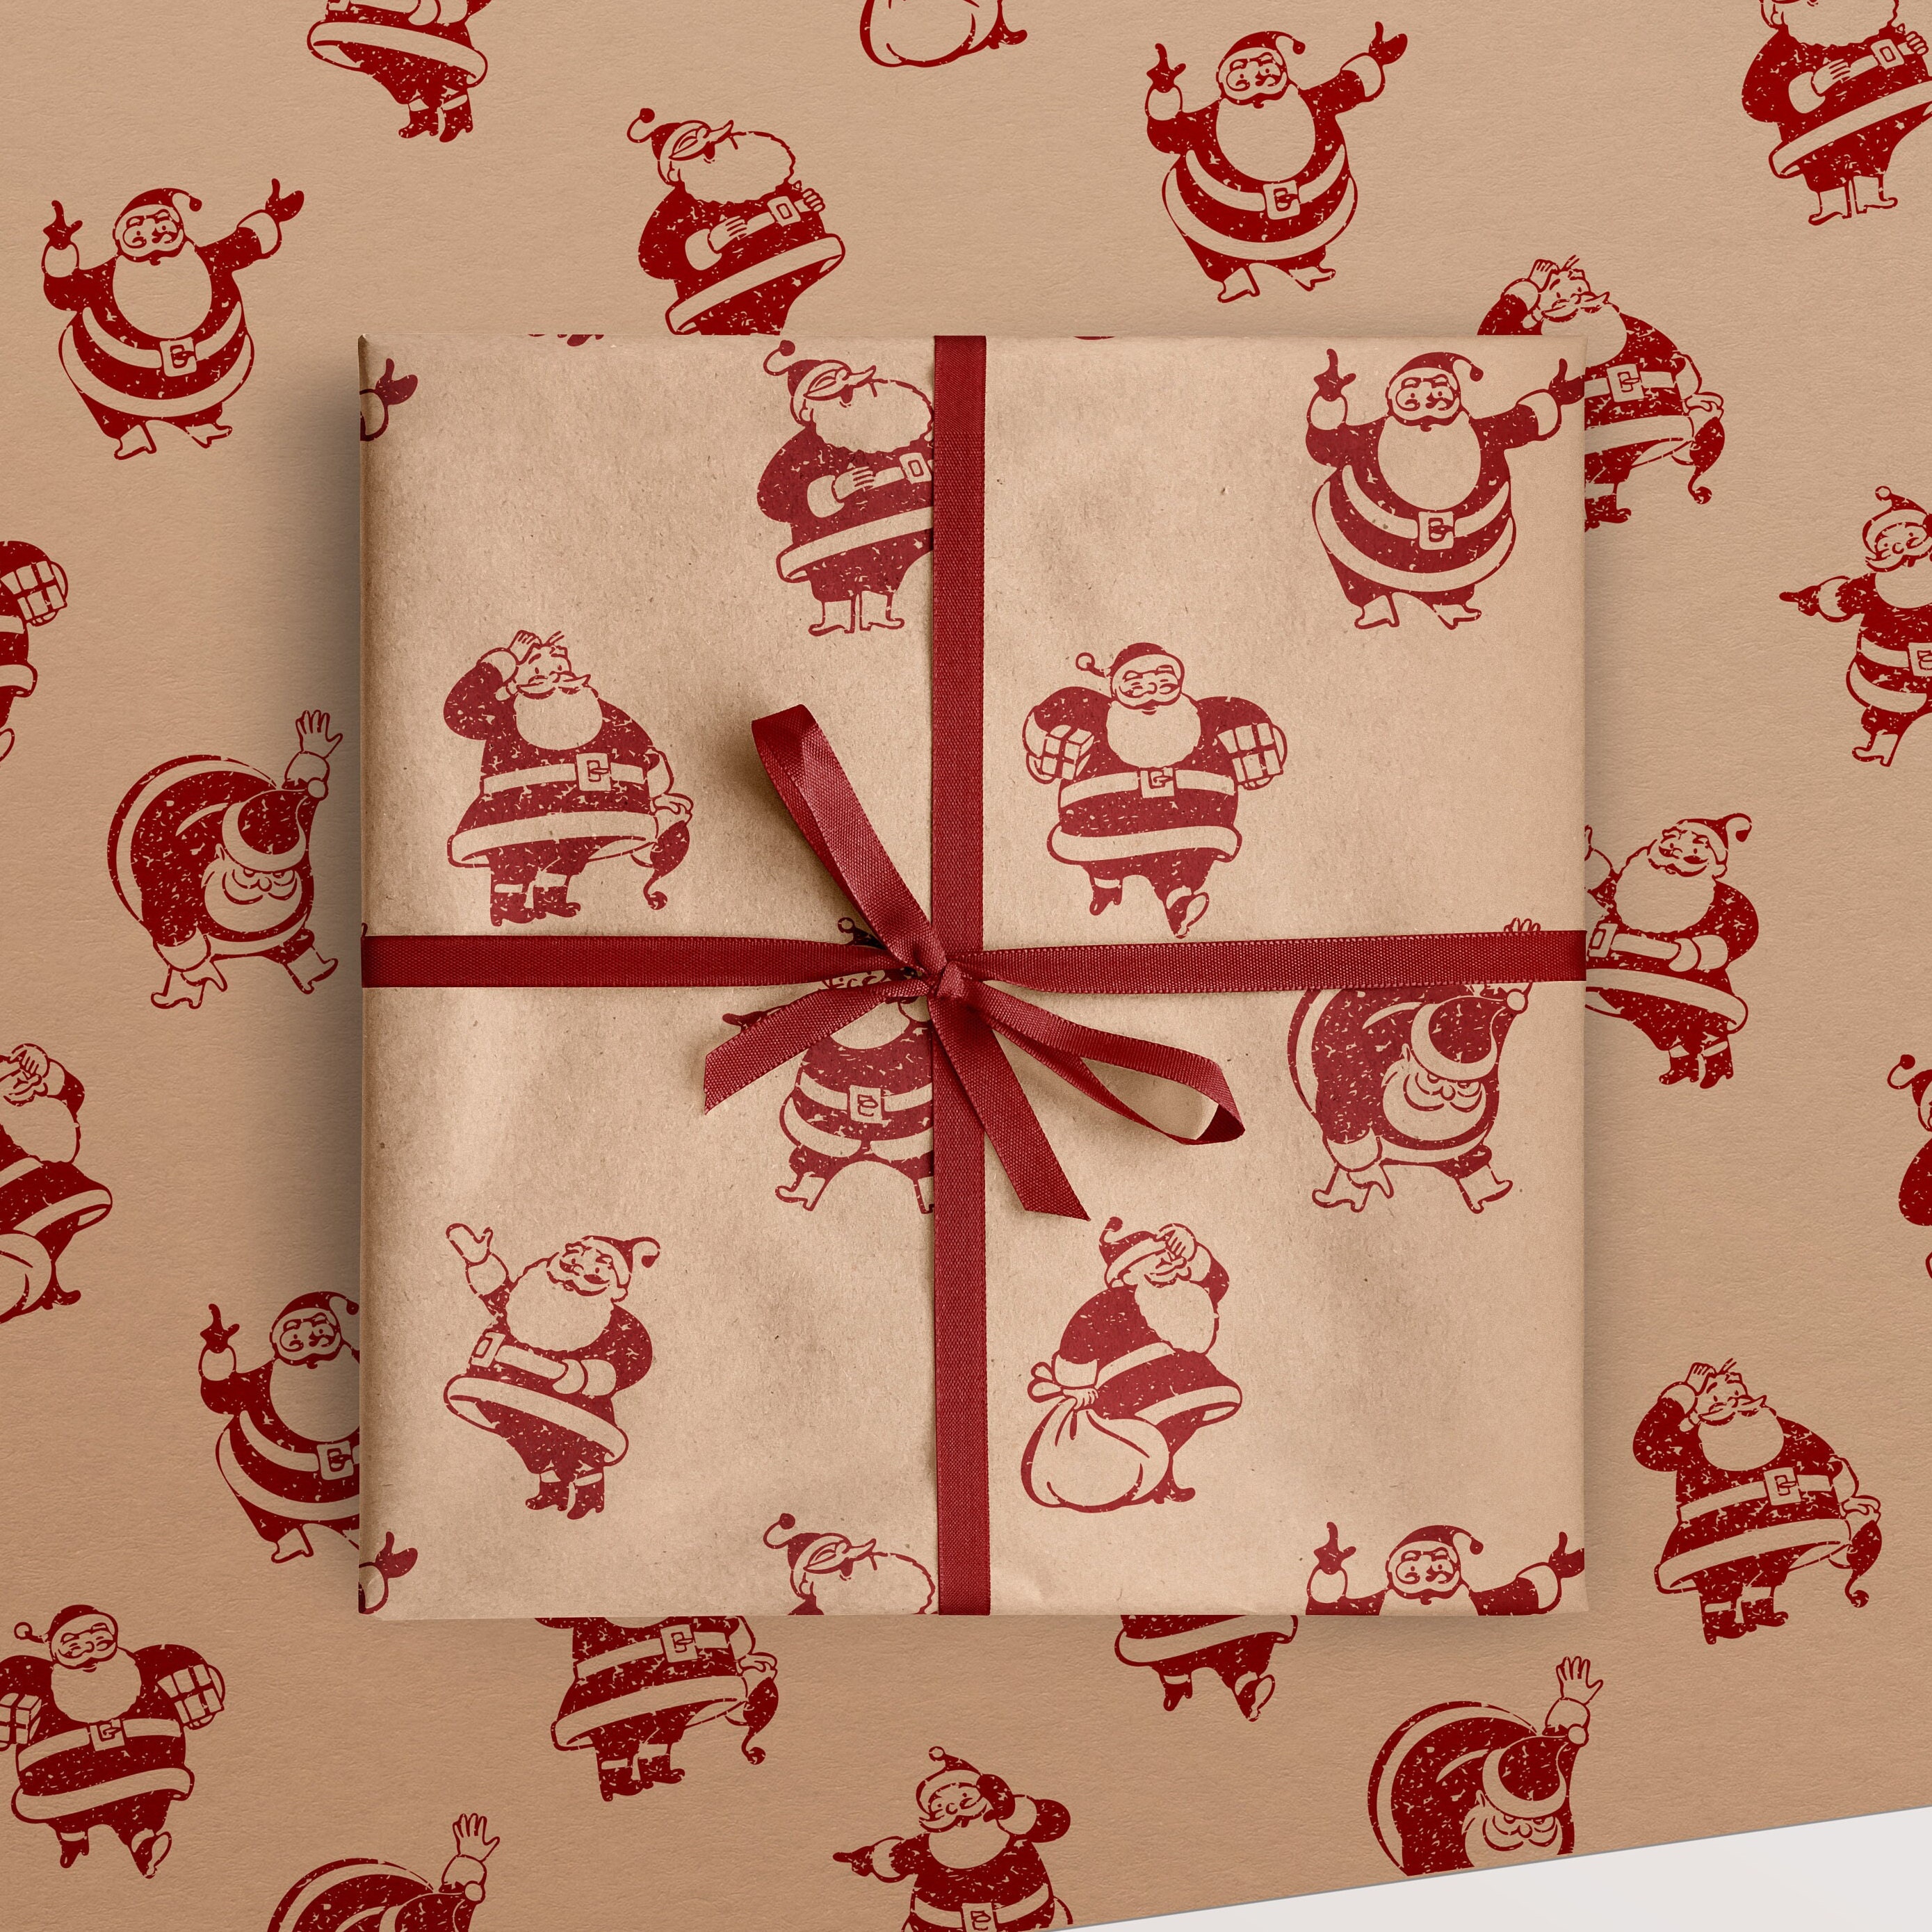 Pooh&friends Eco Gift Wrapping Paper Rolls Classic Winnie-the-pooh  Illustration Recycle Papers for Holiday and Kids Birthday Gift Wraps 